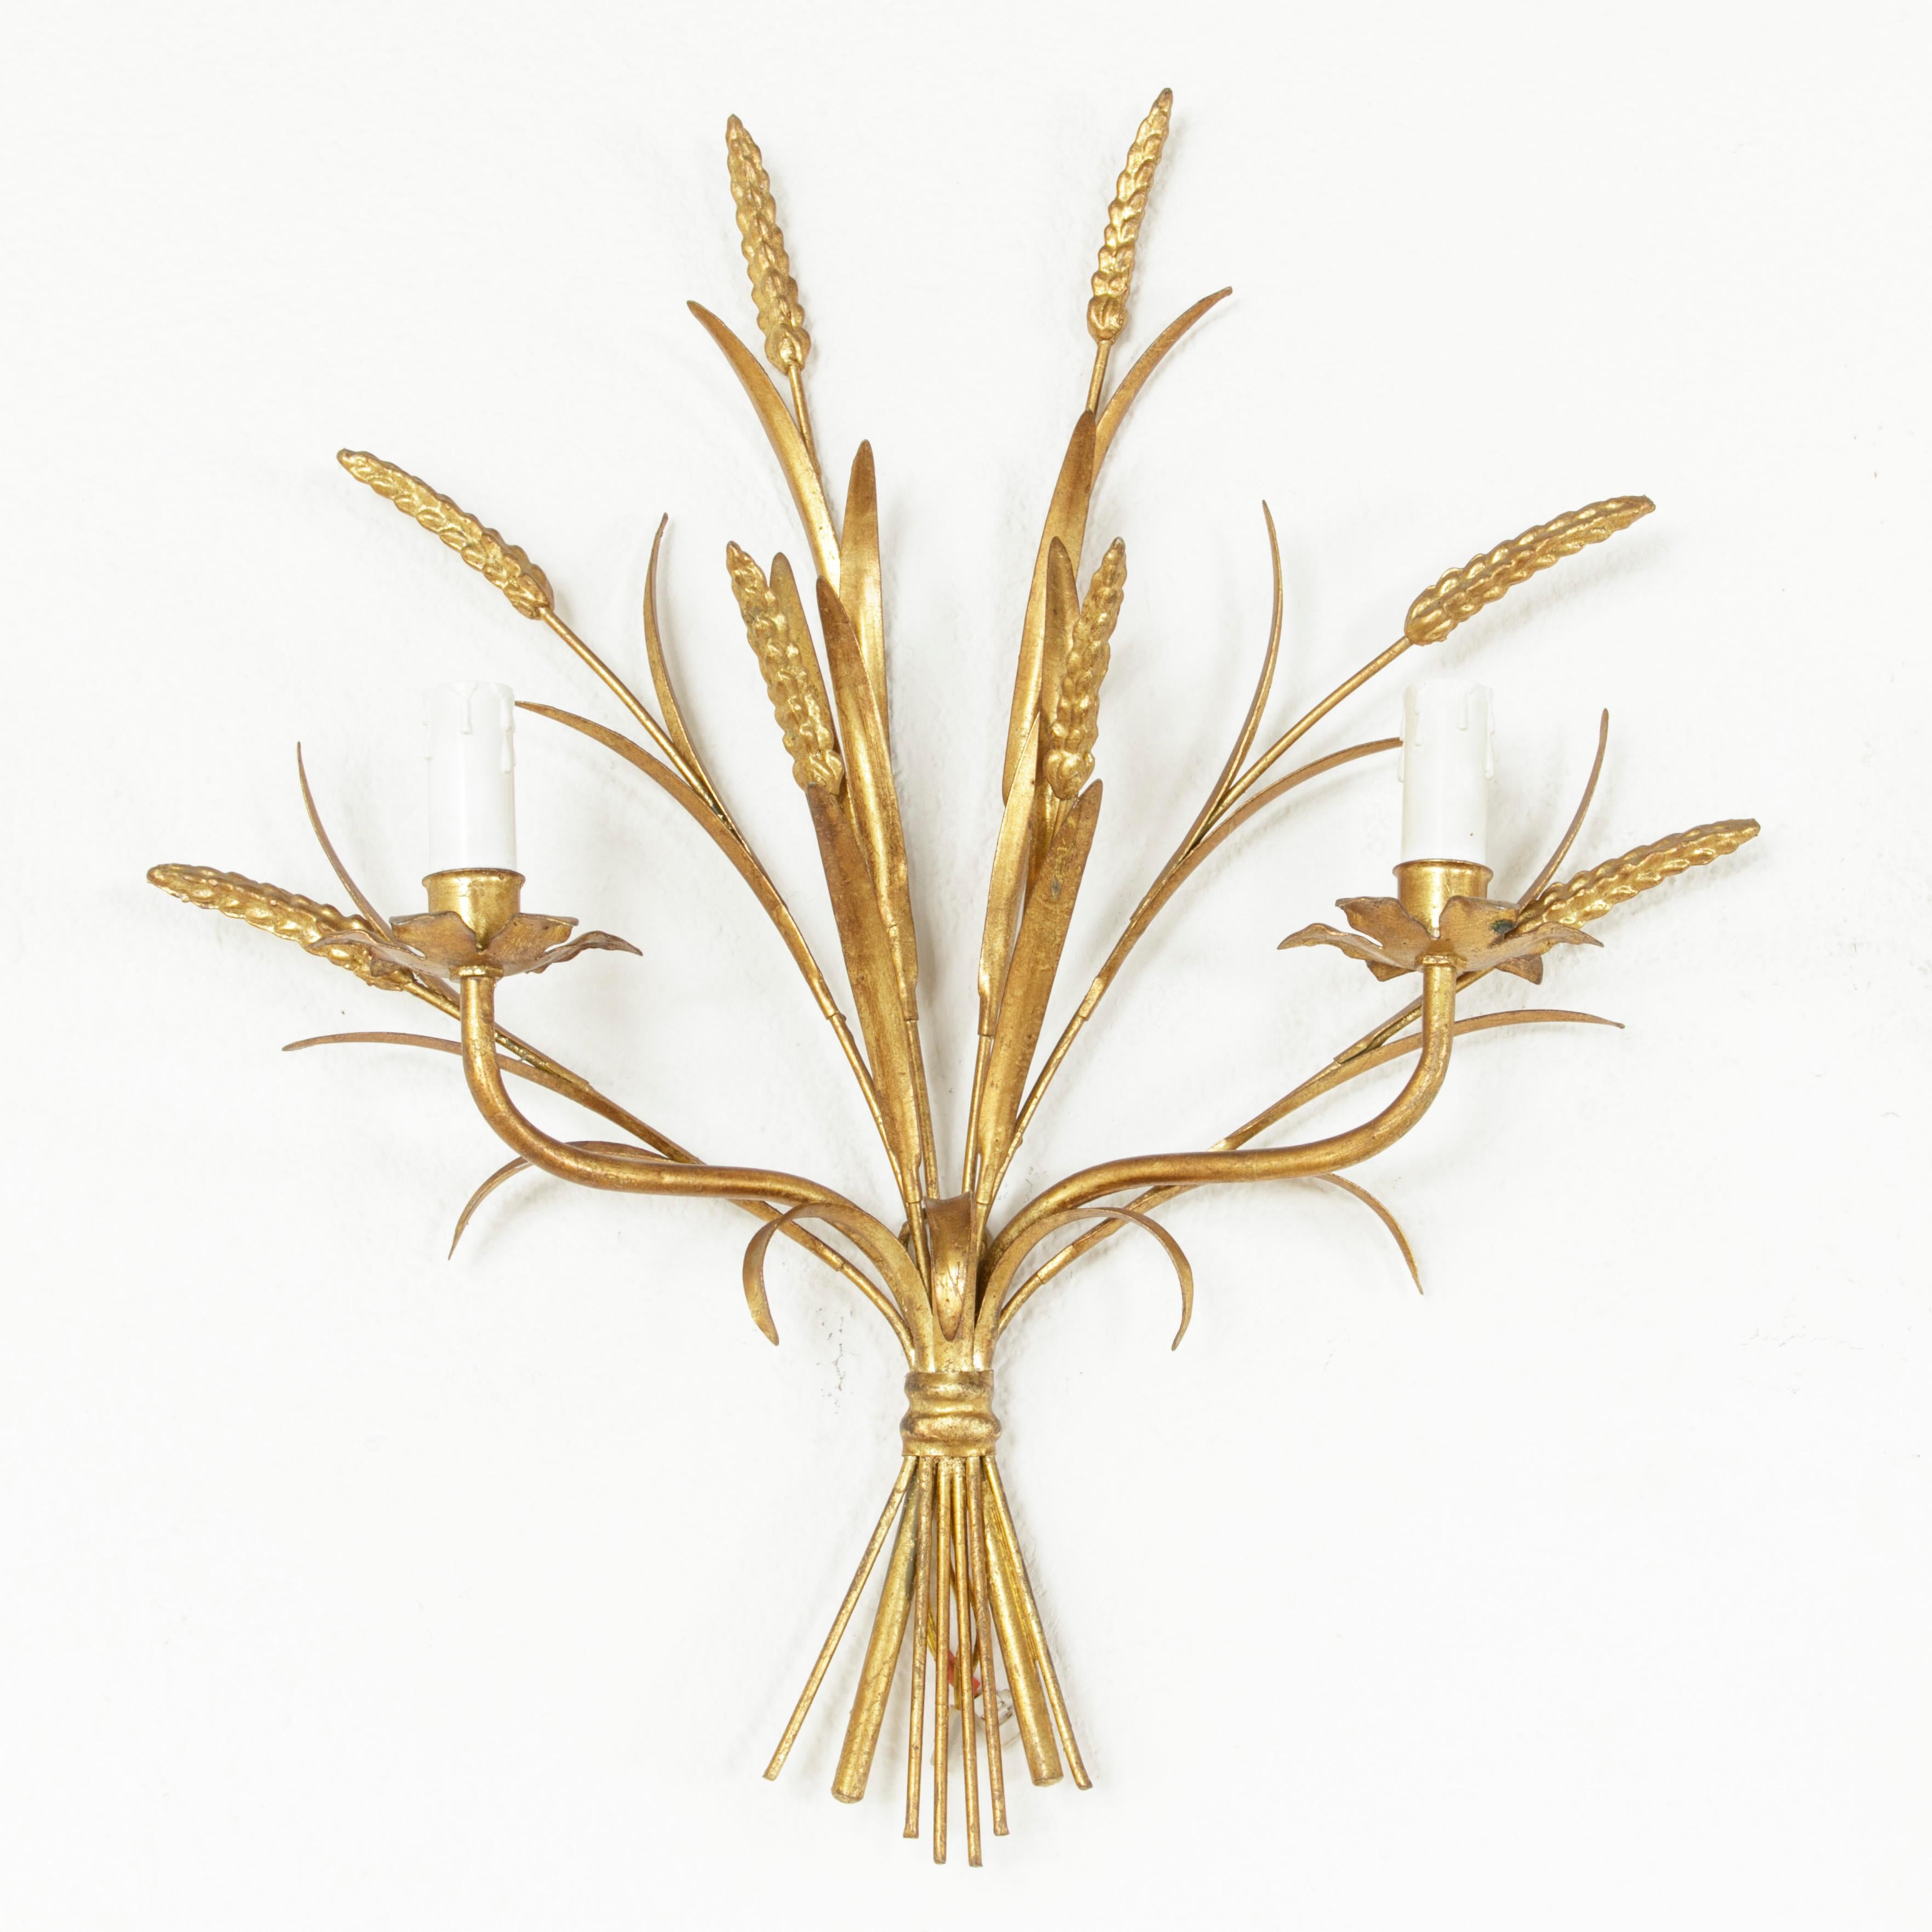 Pair of Mid-20th Century Large Italian Gilt Metal Wall Sconces with Wheat Motif 1